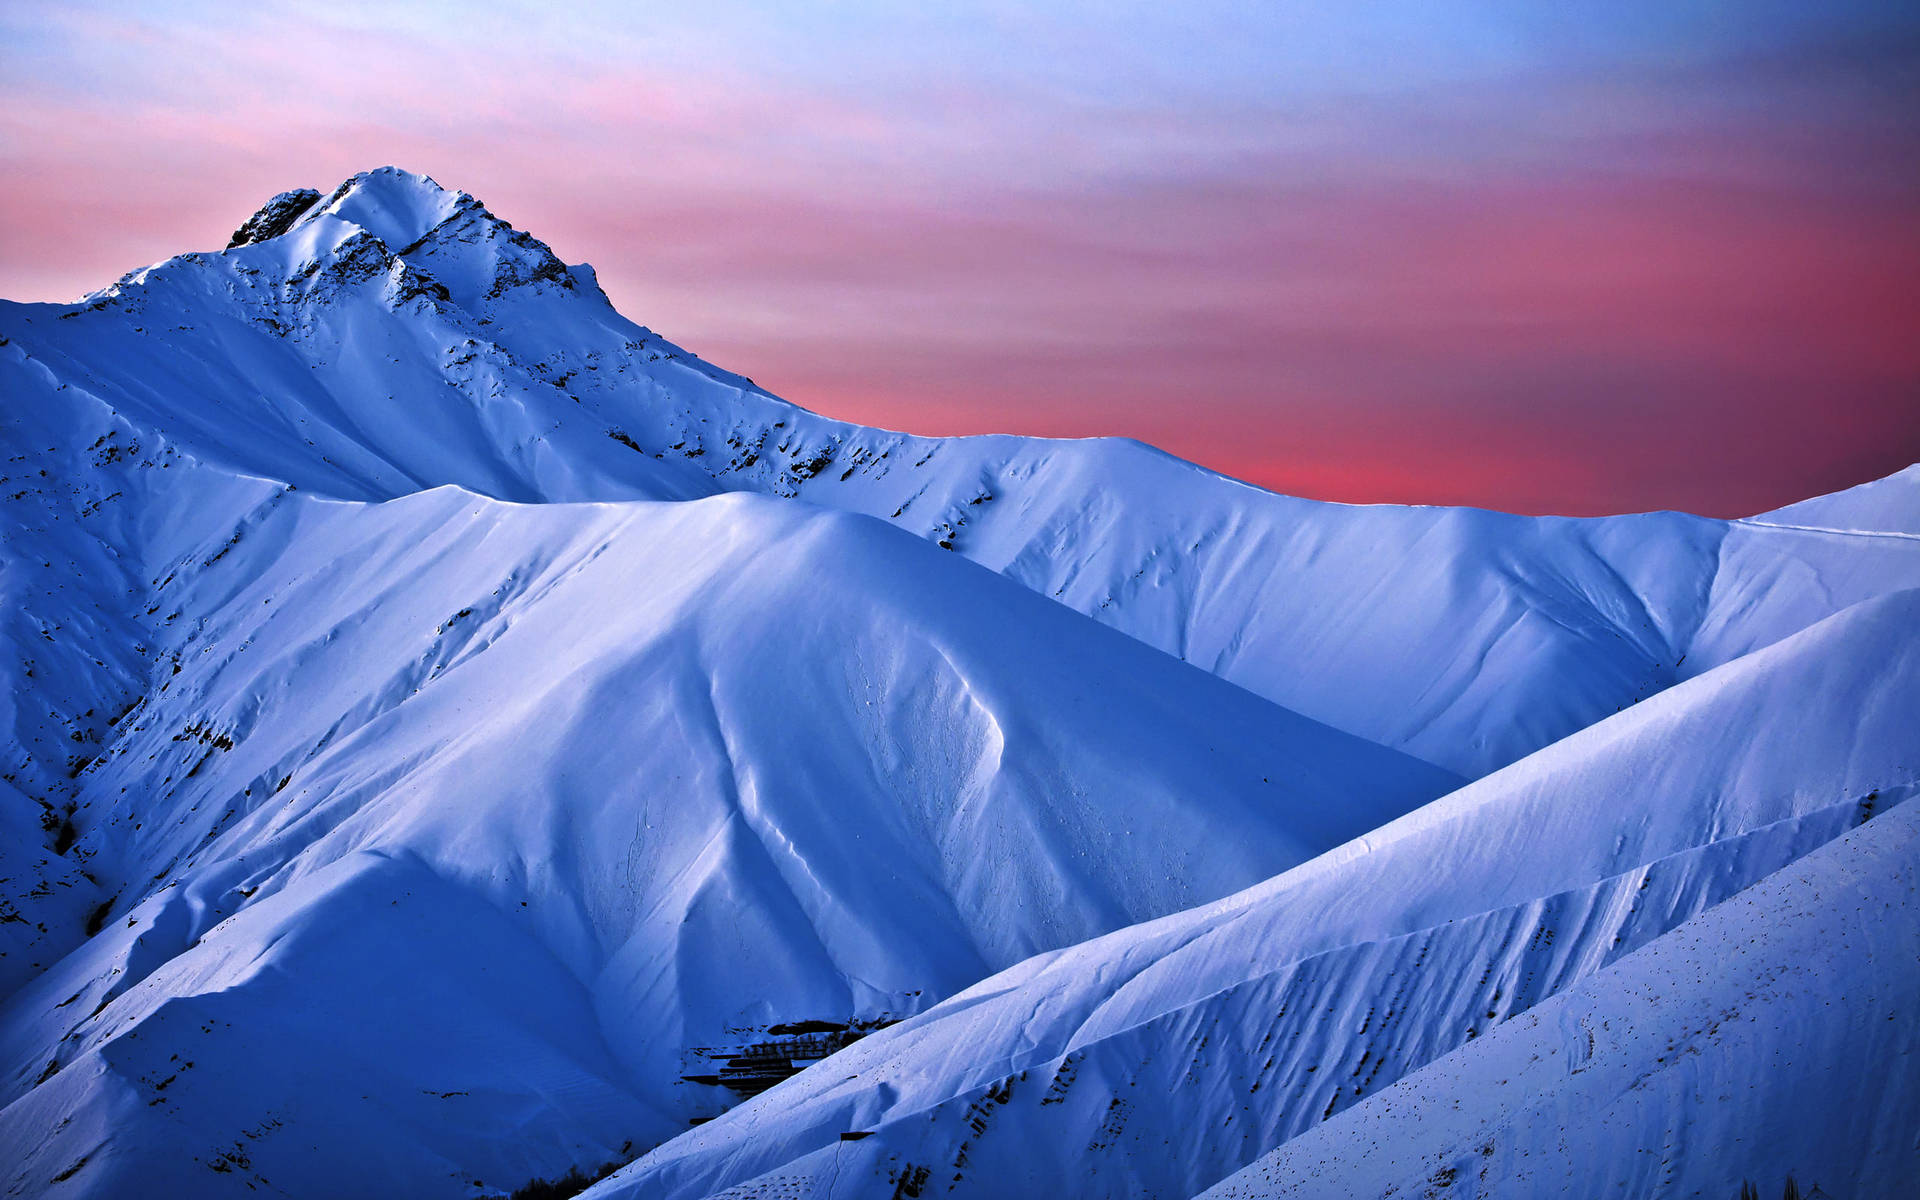 Snow Mountain And Pink Sky Wallpaper